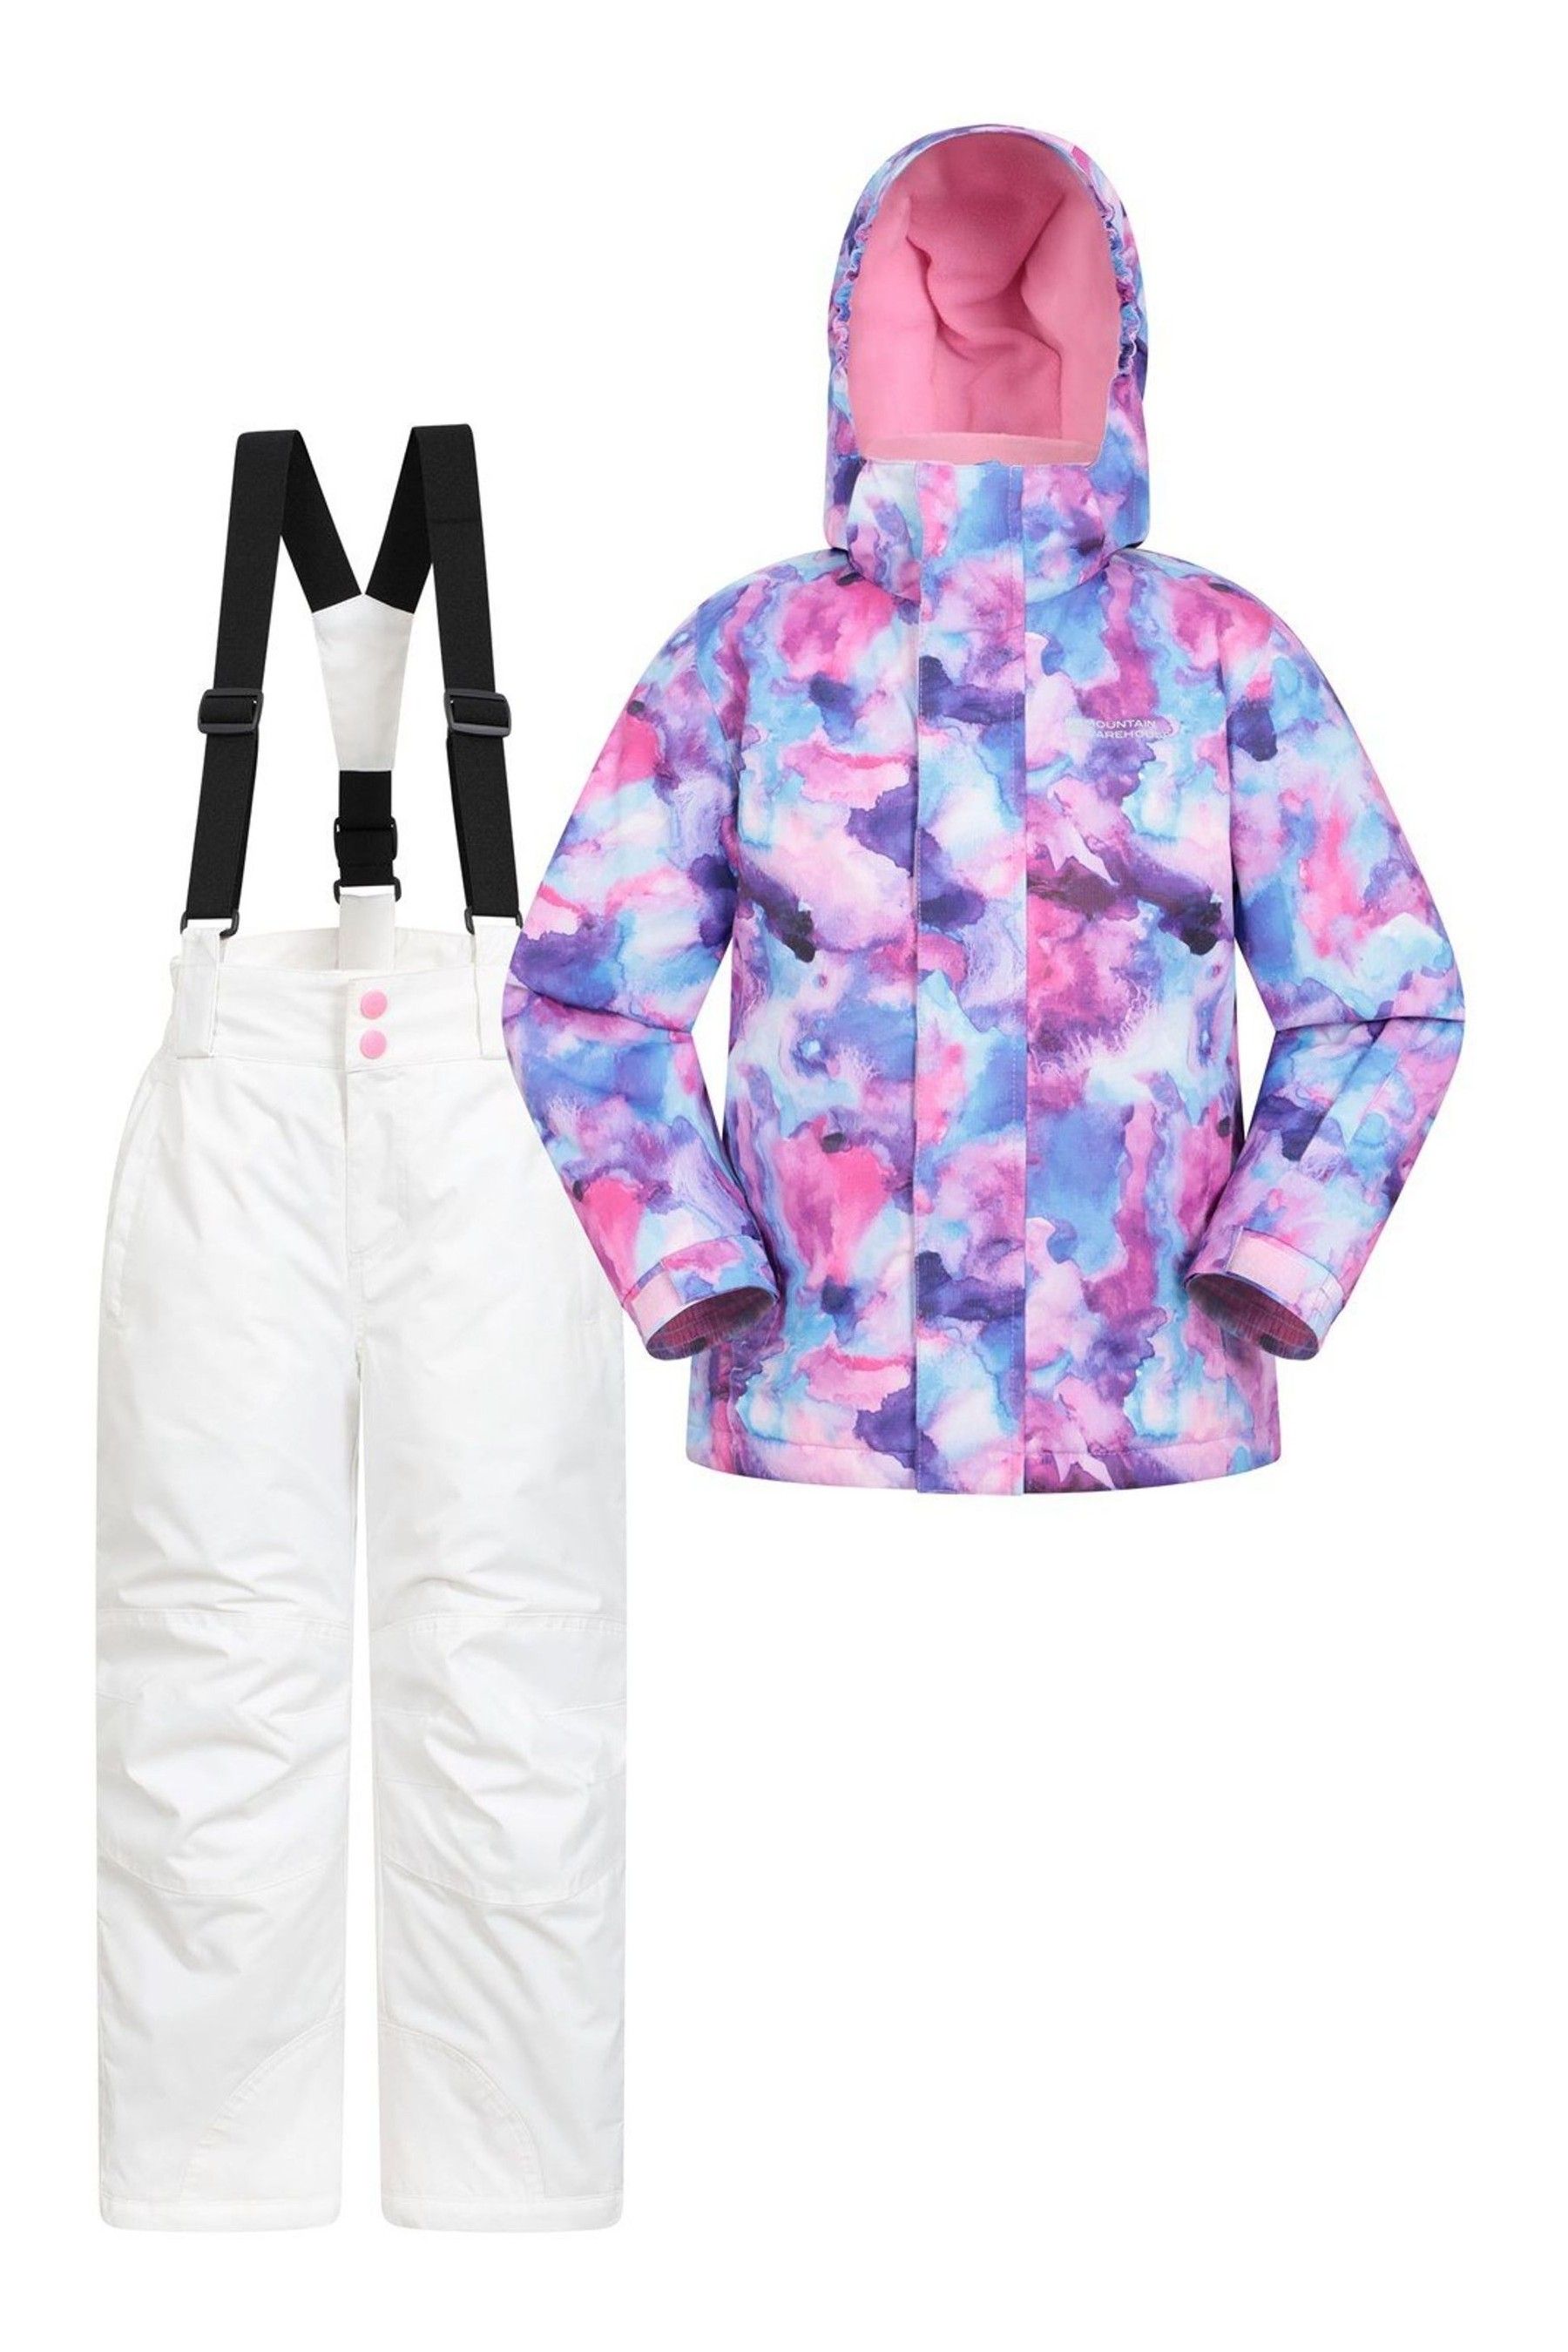 Buy Mountain Warehouse Pink Ski Jacket And Trouser Set - Kids from the ...